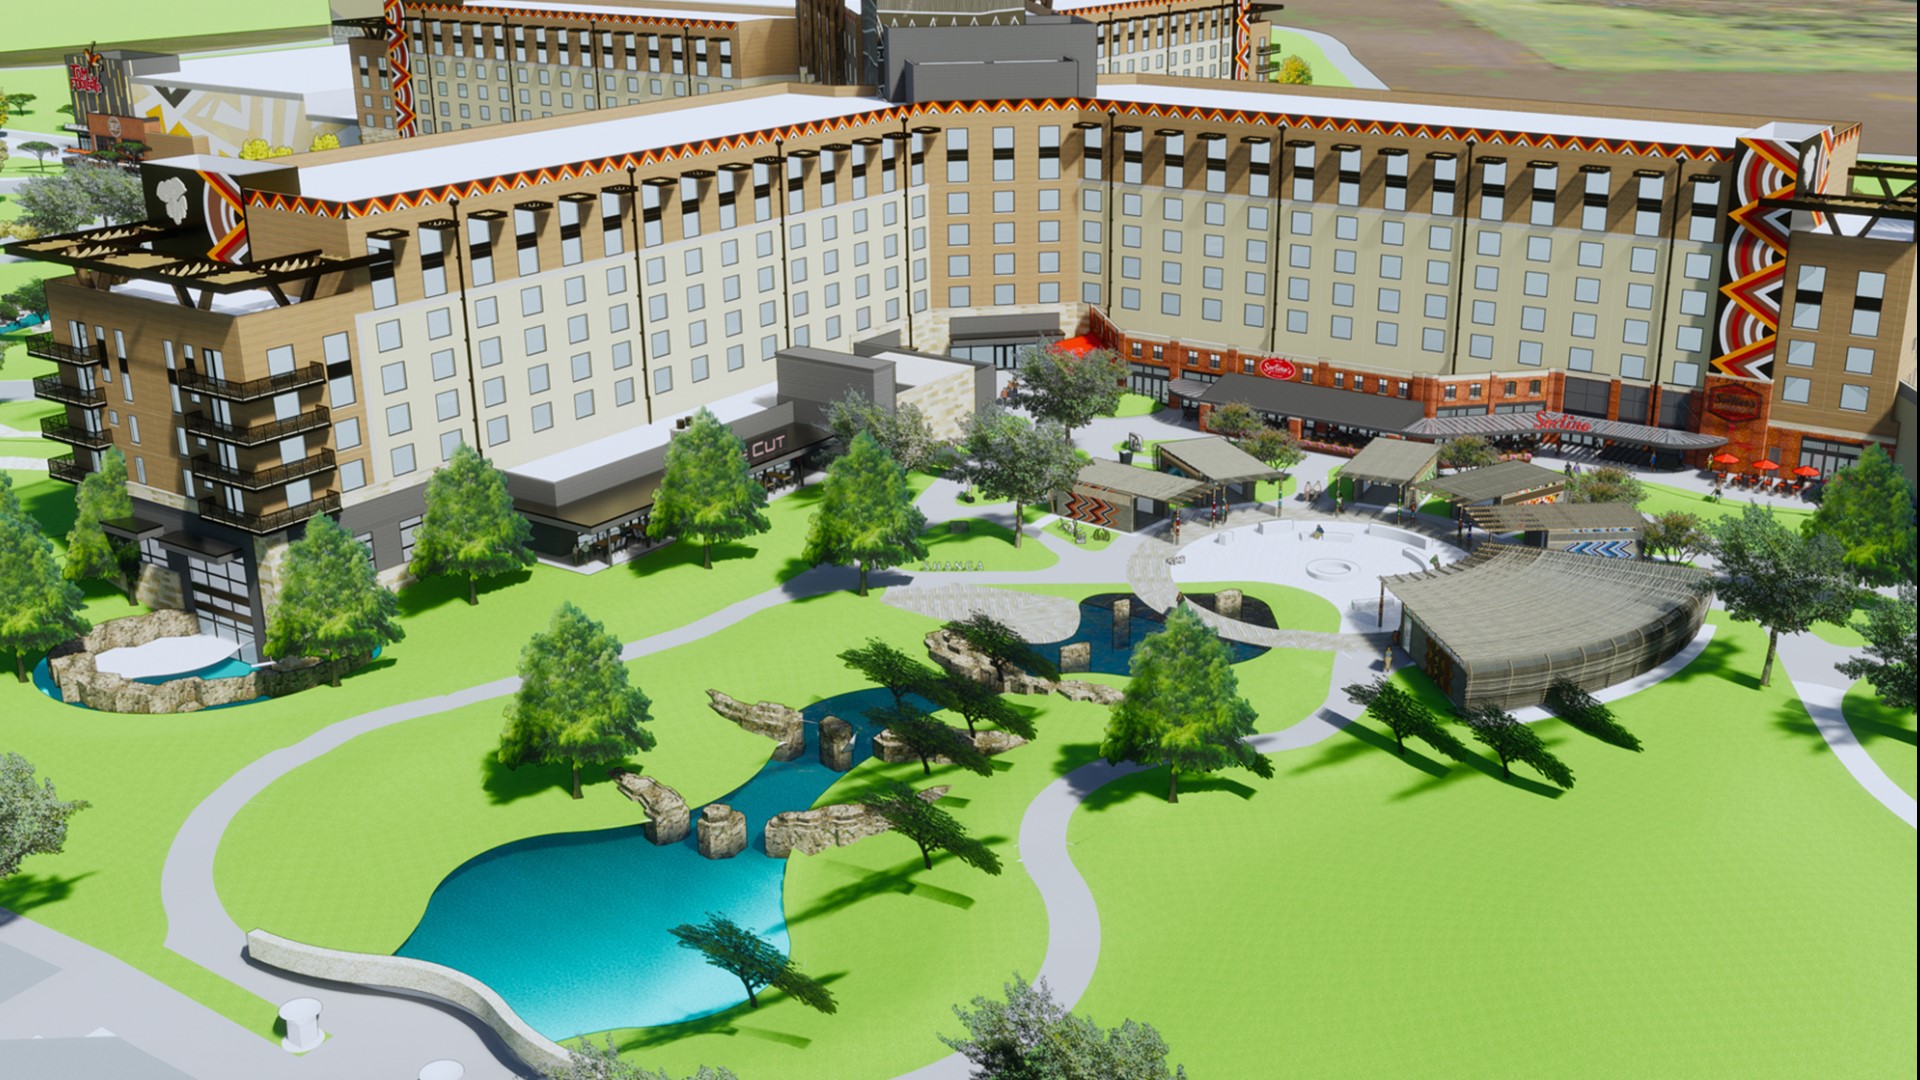 Kalahari Resort released new renderings of its latest location that's made up of a water park, entertainment centers and convention centers.